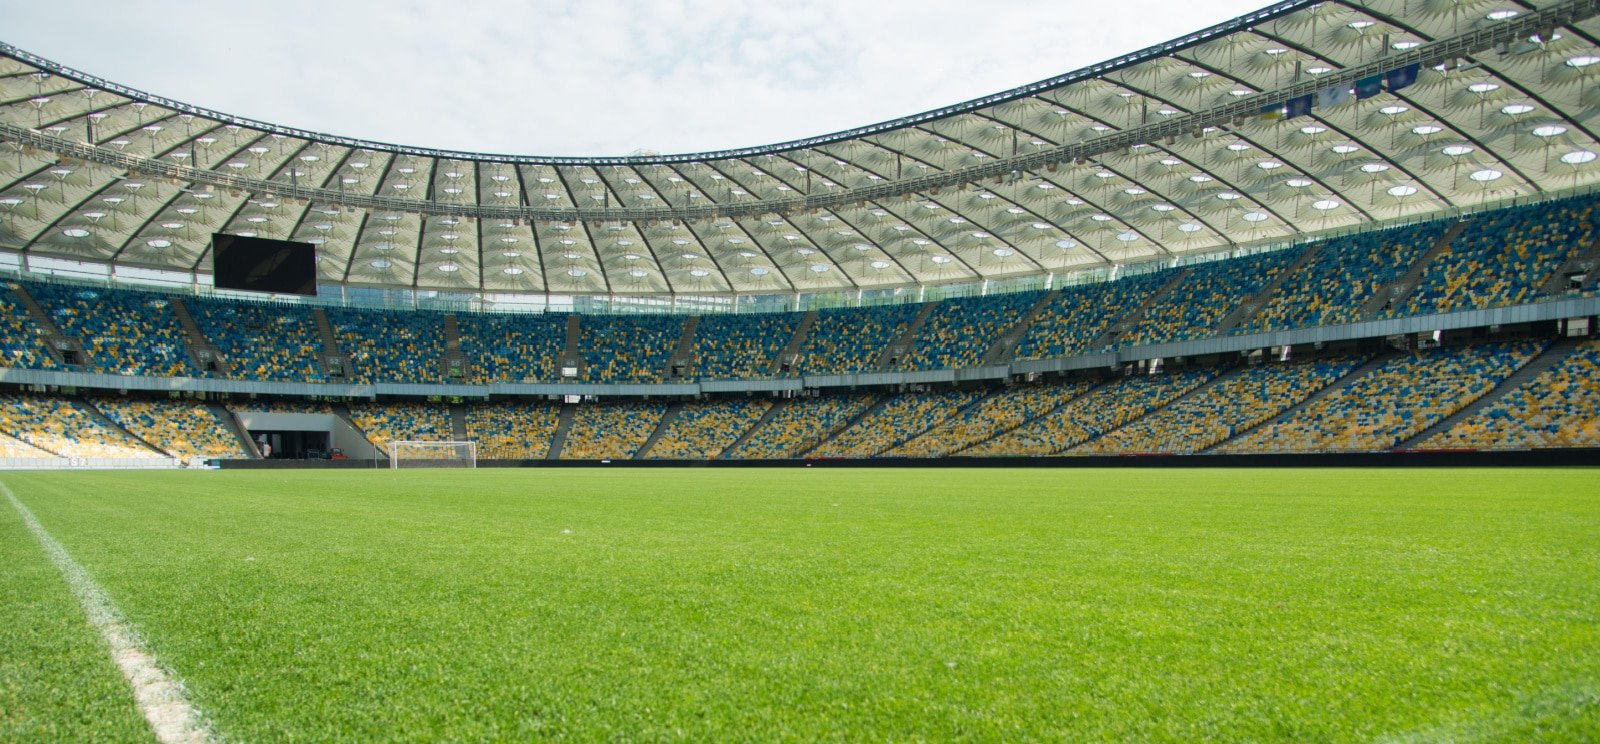 CAFM SOFTWARE FOR STADIUMS